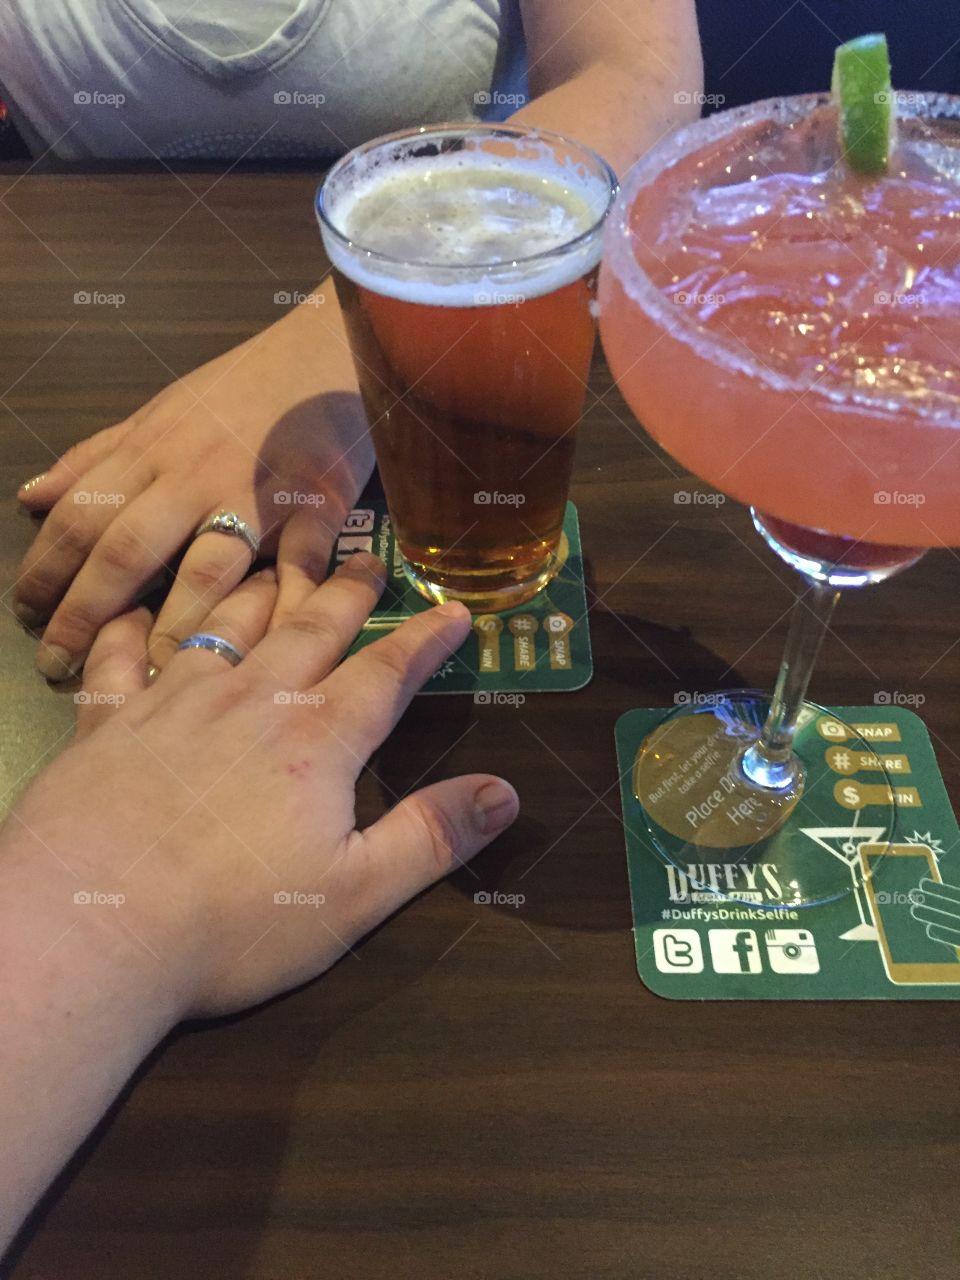 Just married having a drink at our favorite sports bar